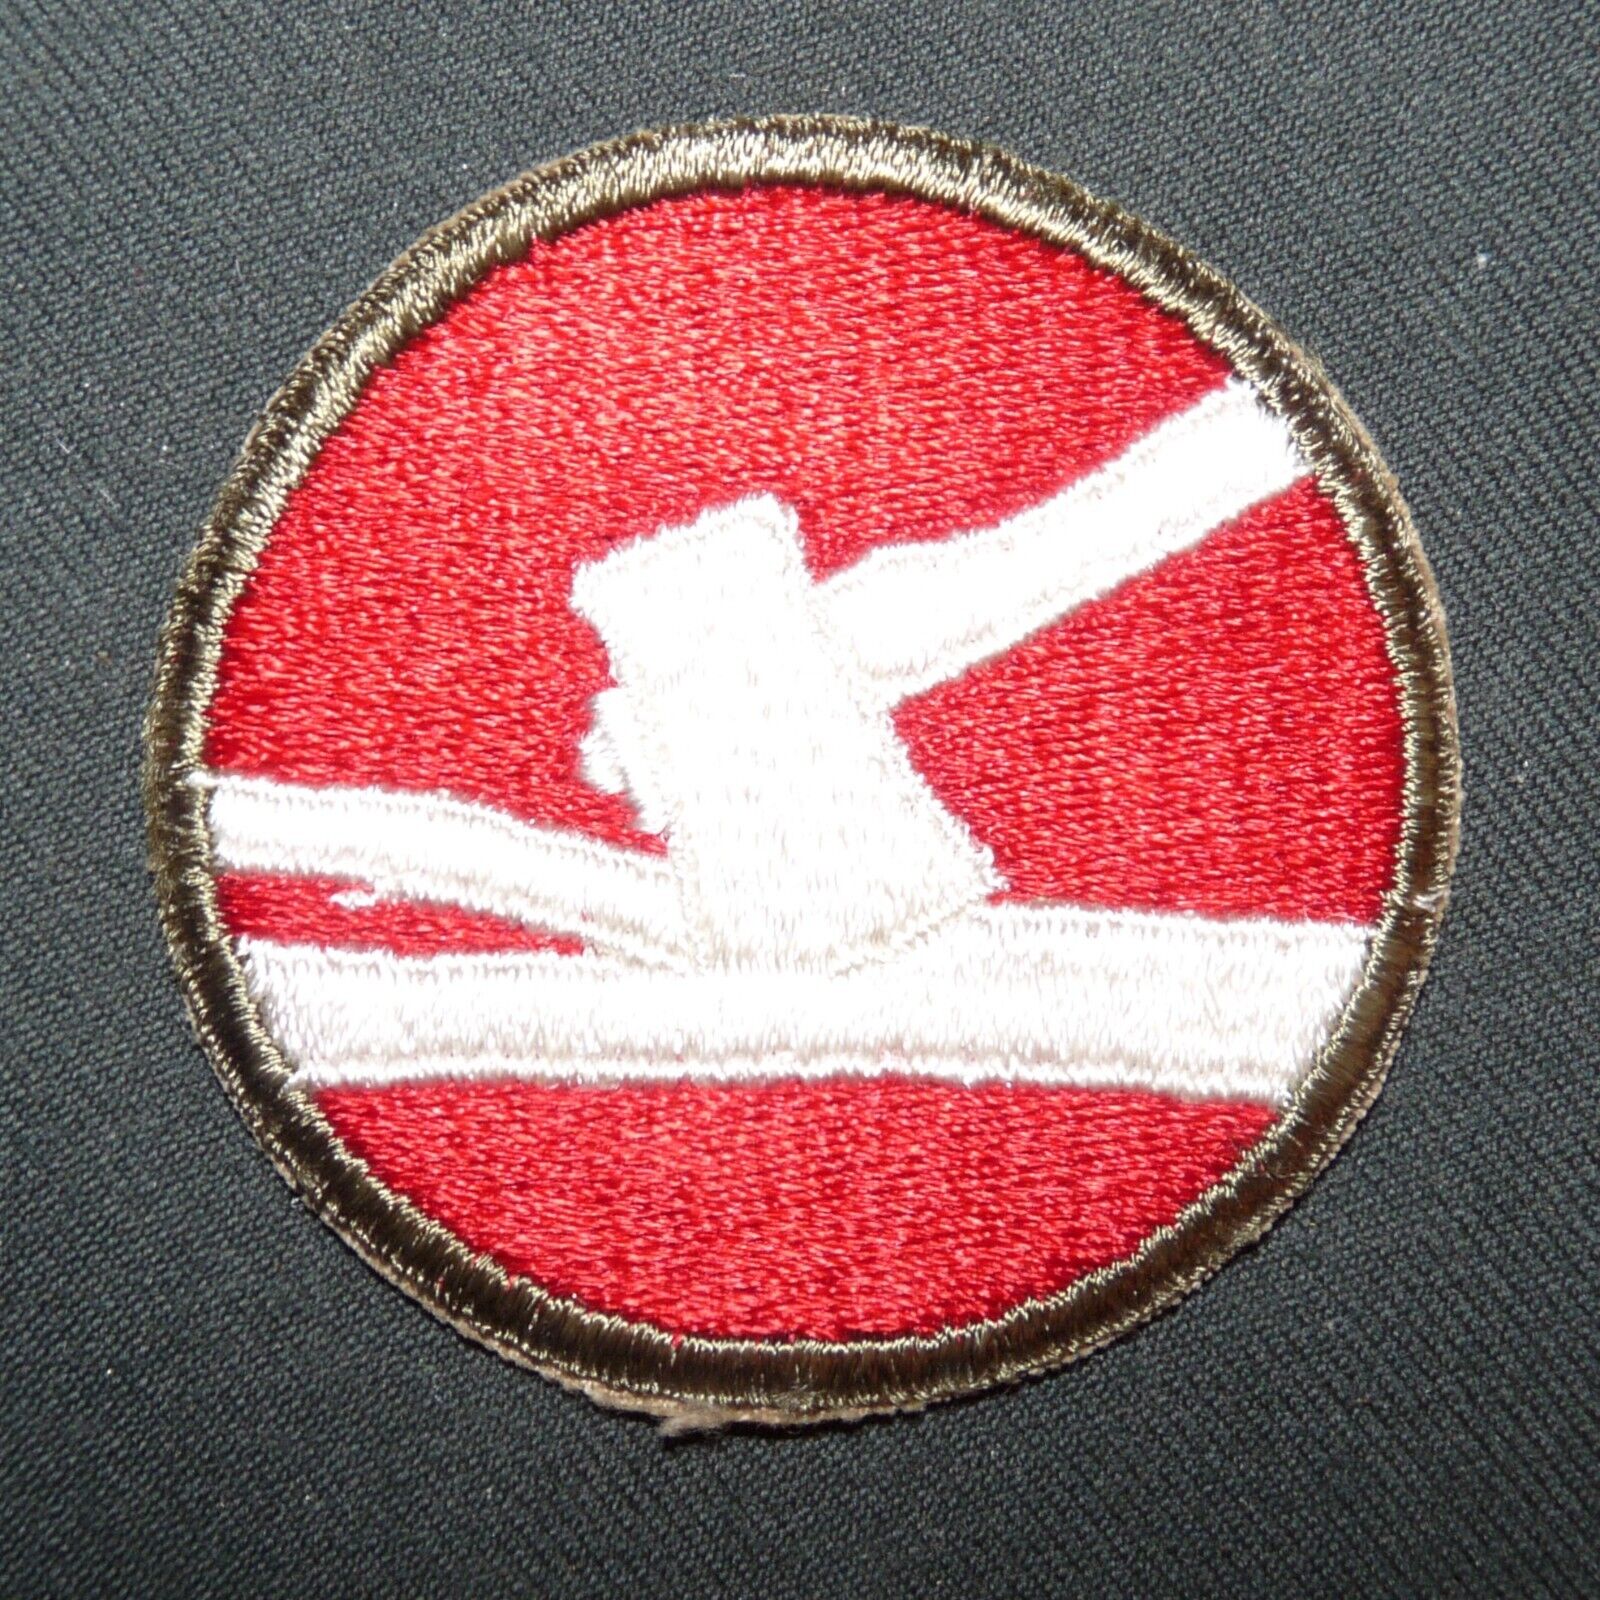 Original WW2 US Army 84th Infantry Division Cotton Embroidered Sleeve Patch SSI